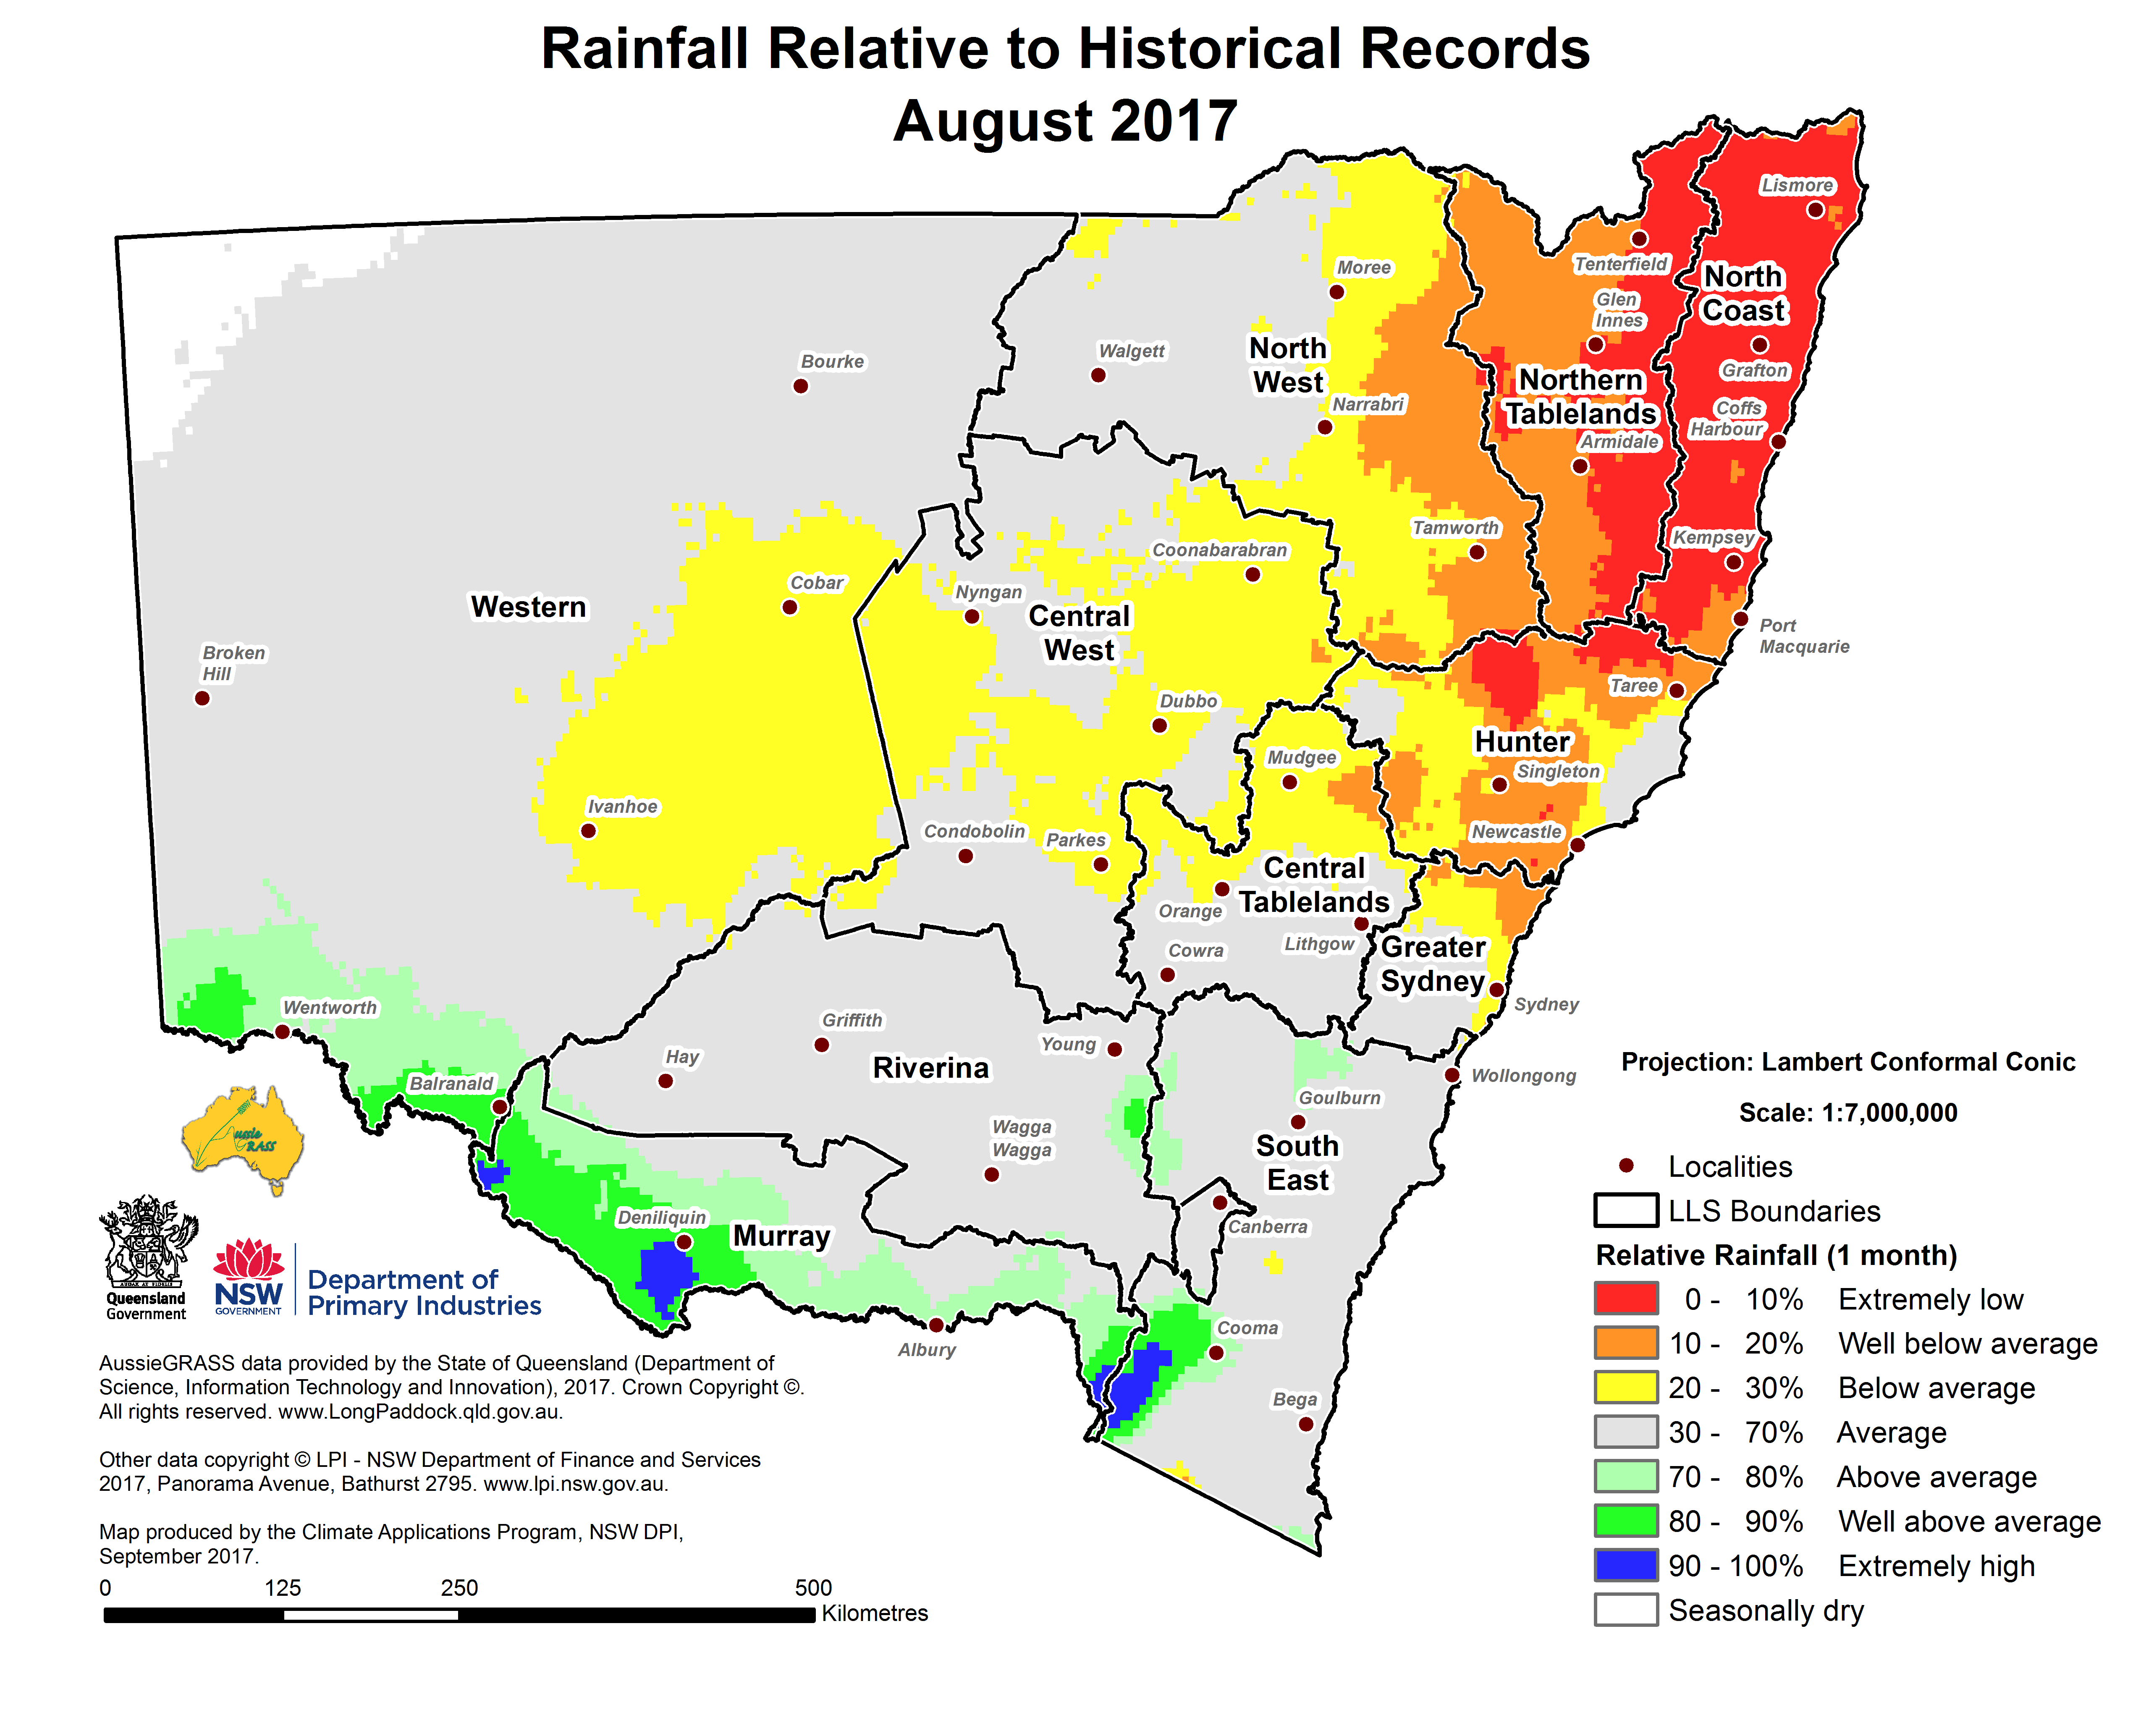 Rainfall Relative to Historical Records August 2017